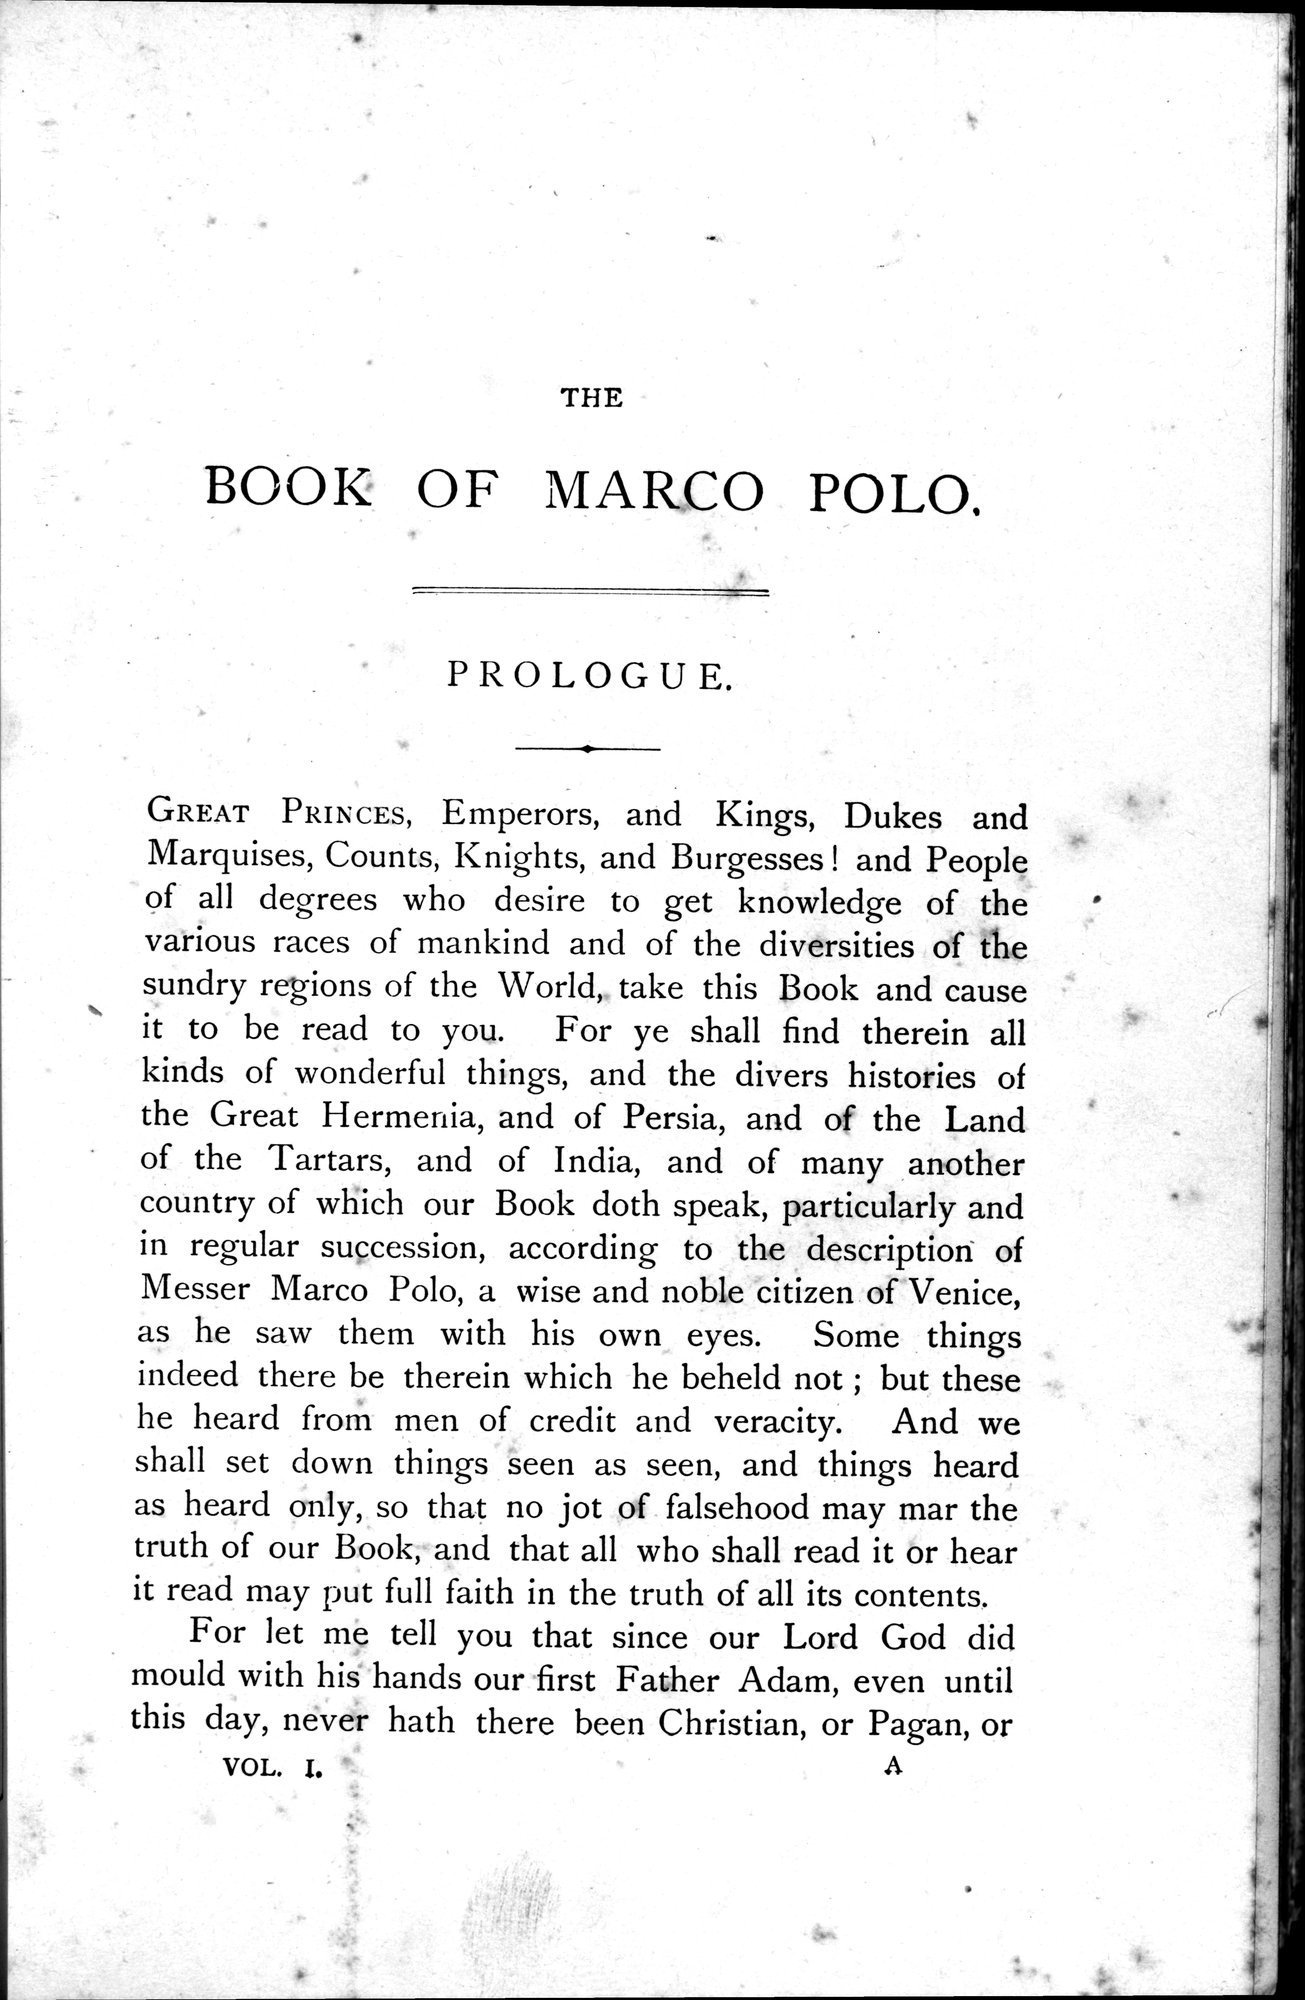 The Book of Ser Marco Polo : vol.1 / 291 ページ（白黒高解像度画像）